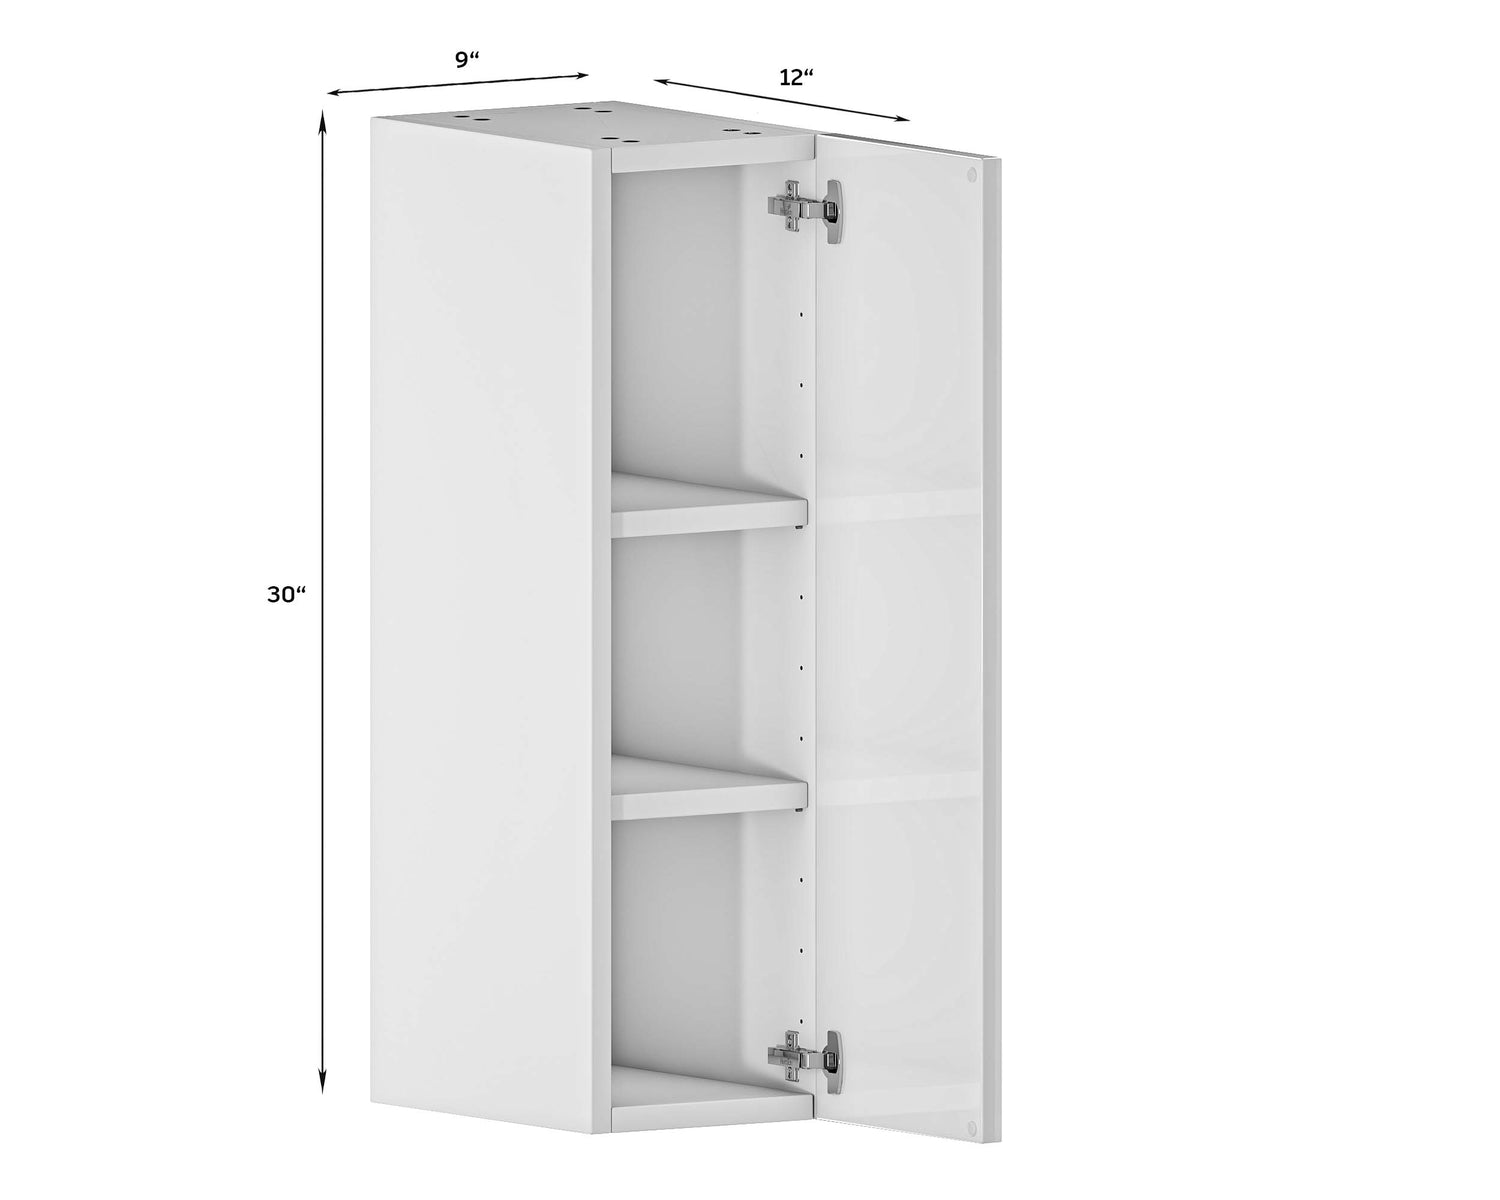 Quick Assemble Modern Style with Soft Close 9 in Wall Kitchen Cabinet (9 in W x 12 D x 30 in H) -  Pro-Edge HD